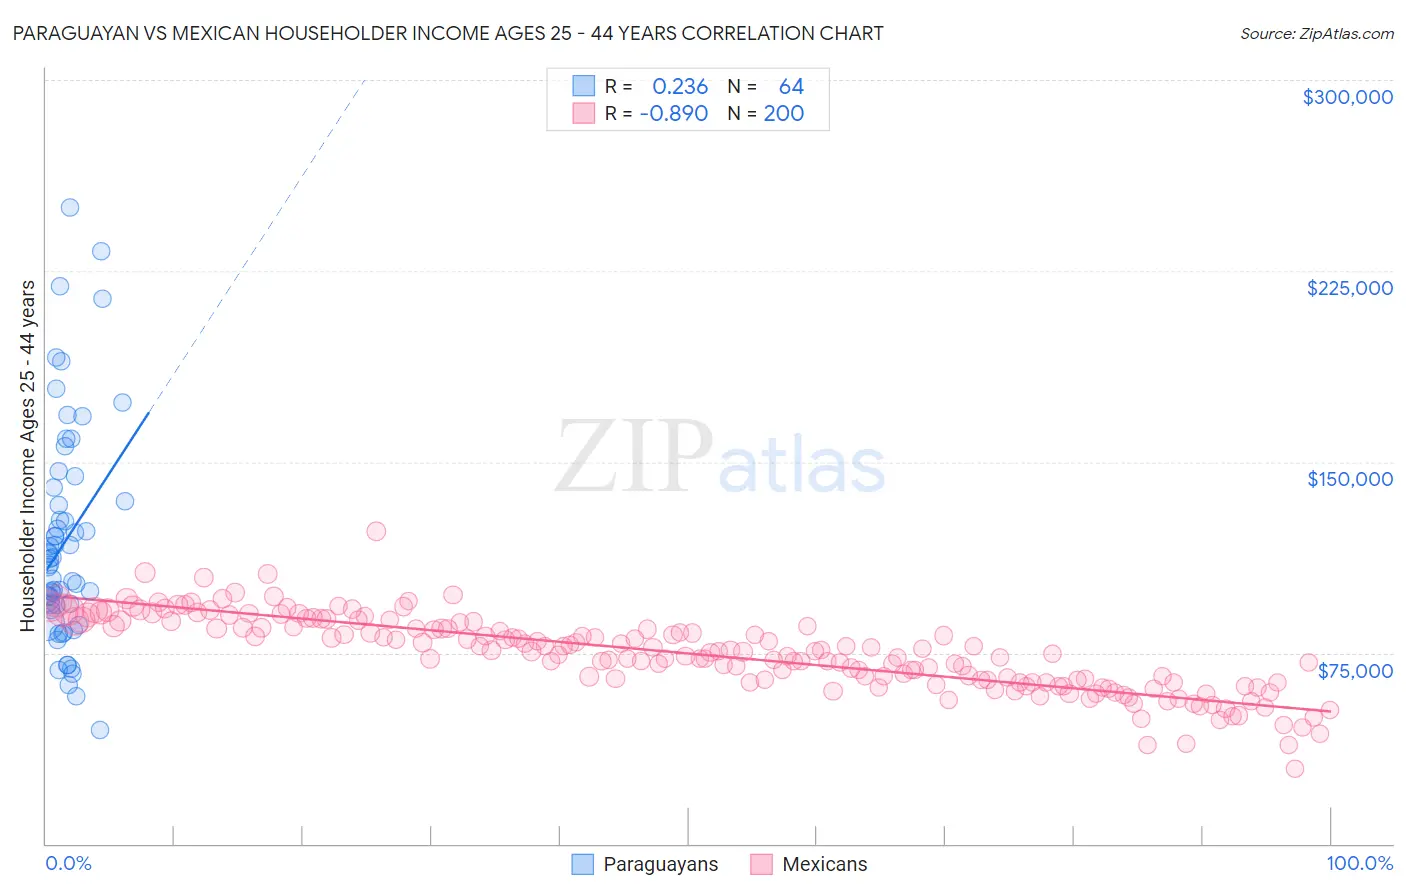 Paraguayan vs Mexican Householder Income Ages 25 - 44 years